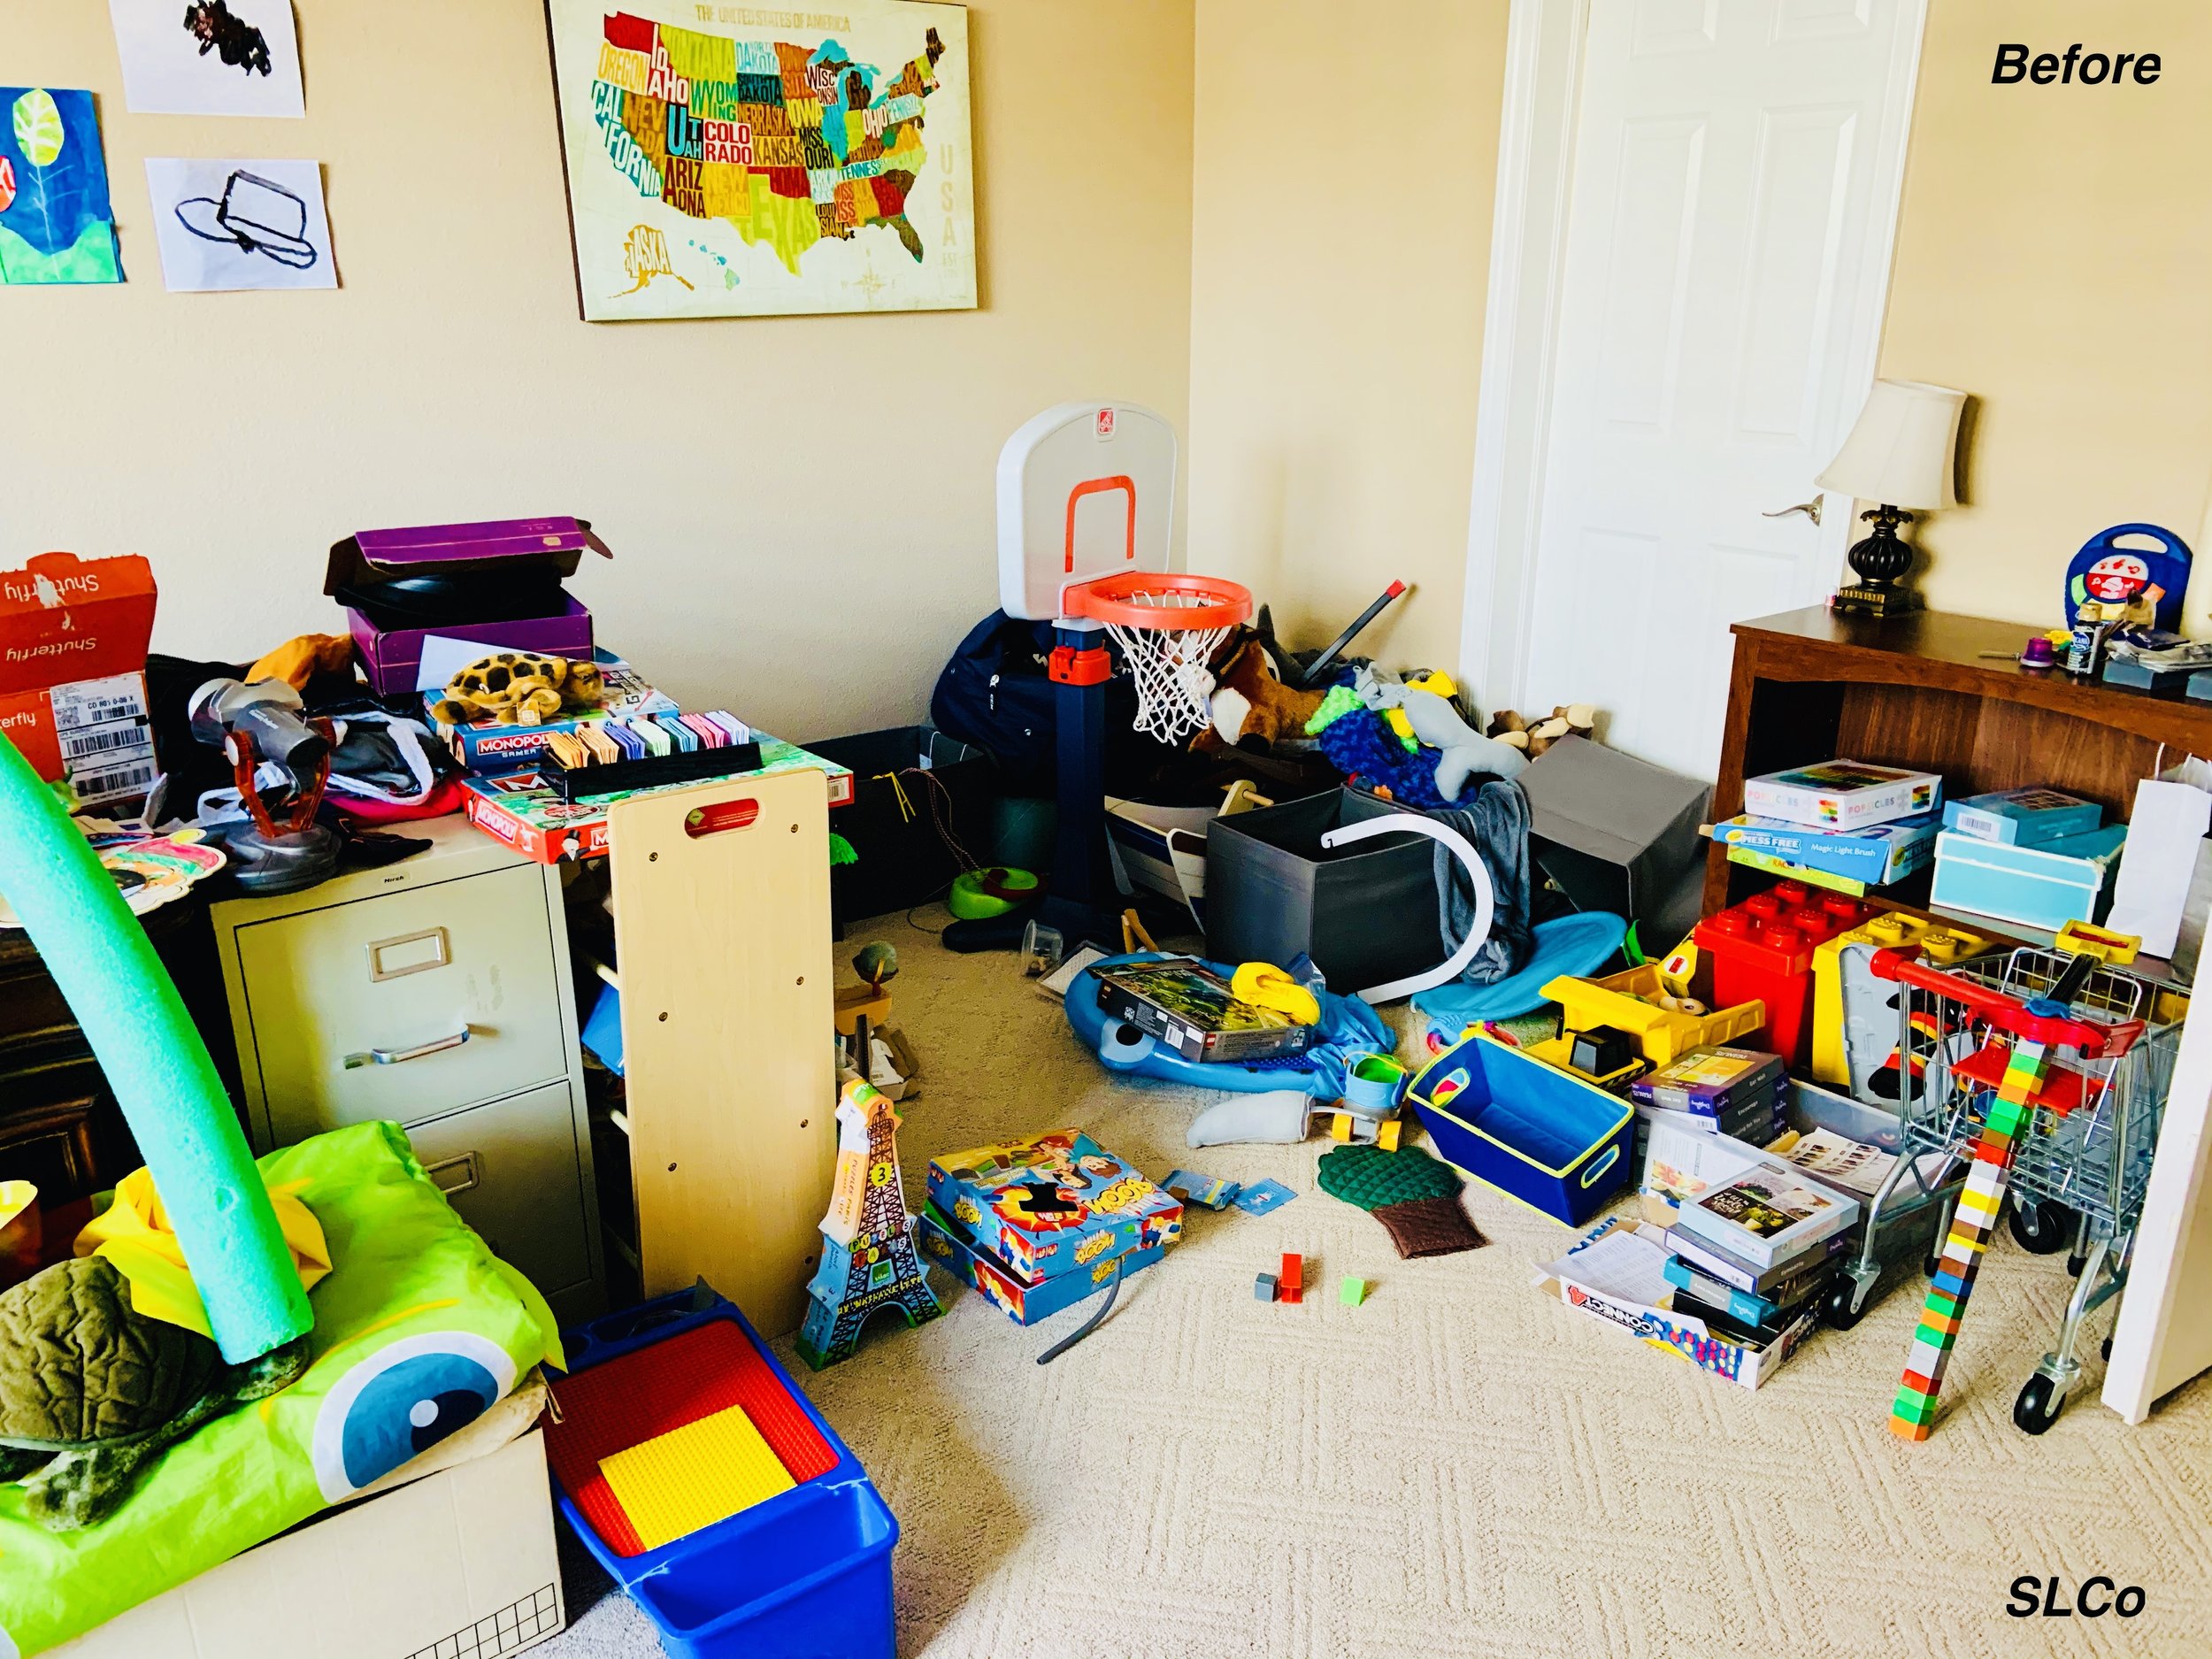 Before photo of playroom with toy boxes and toys on the floor and can't see what items are there stacked on one another.